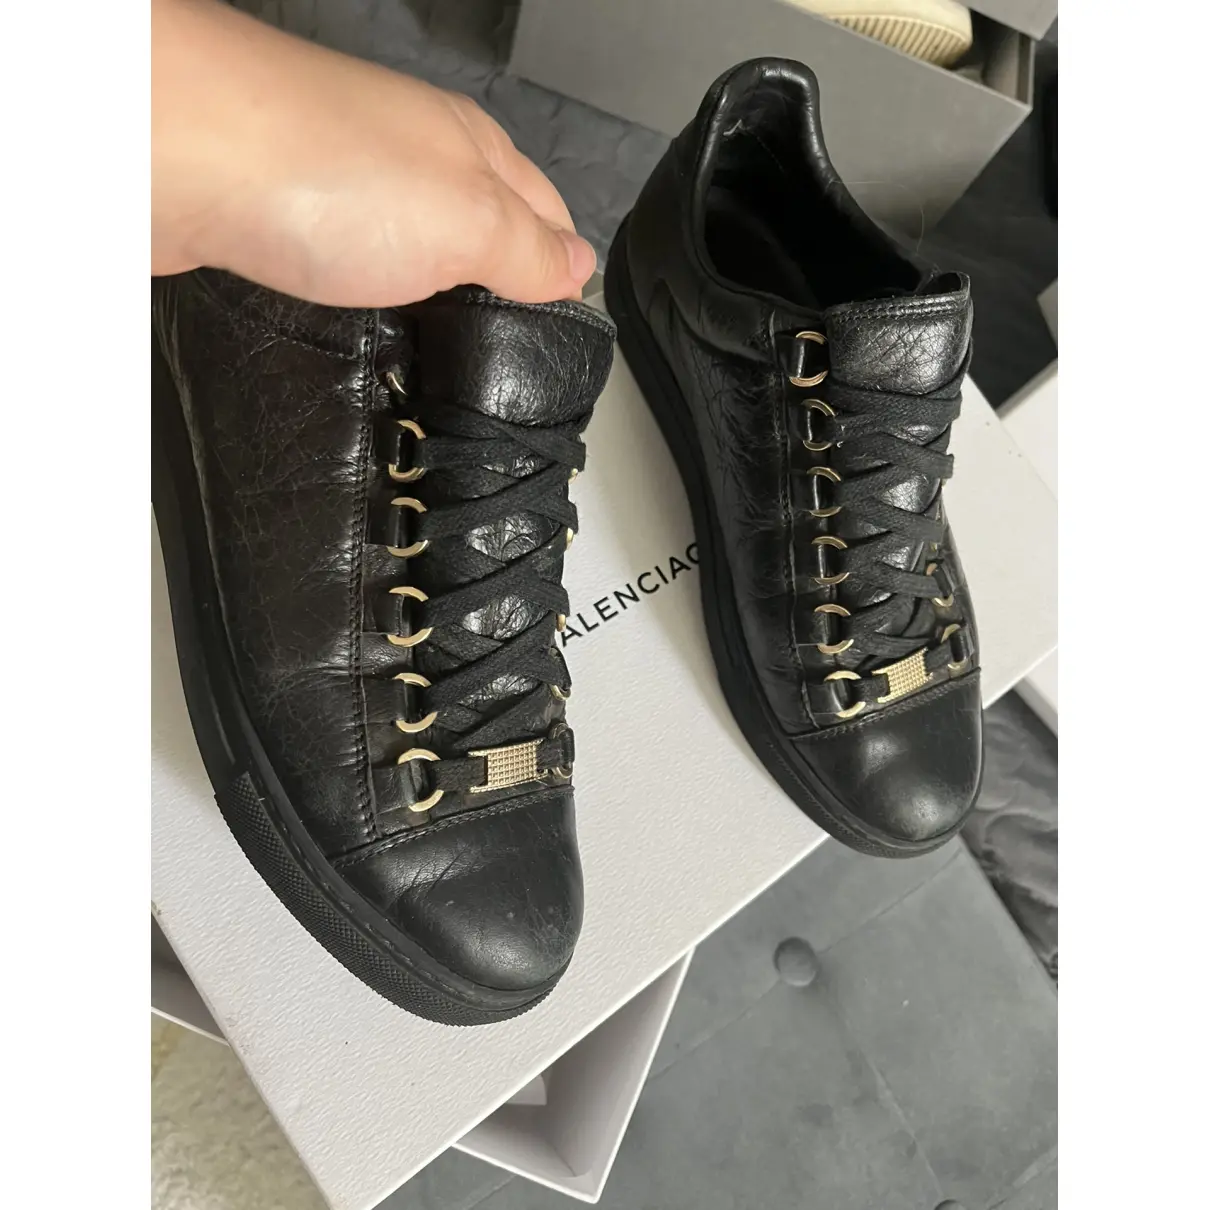 Buy Balenciaga Arena leather trainers online